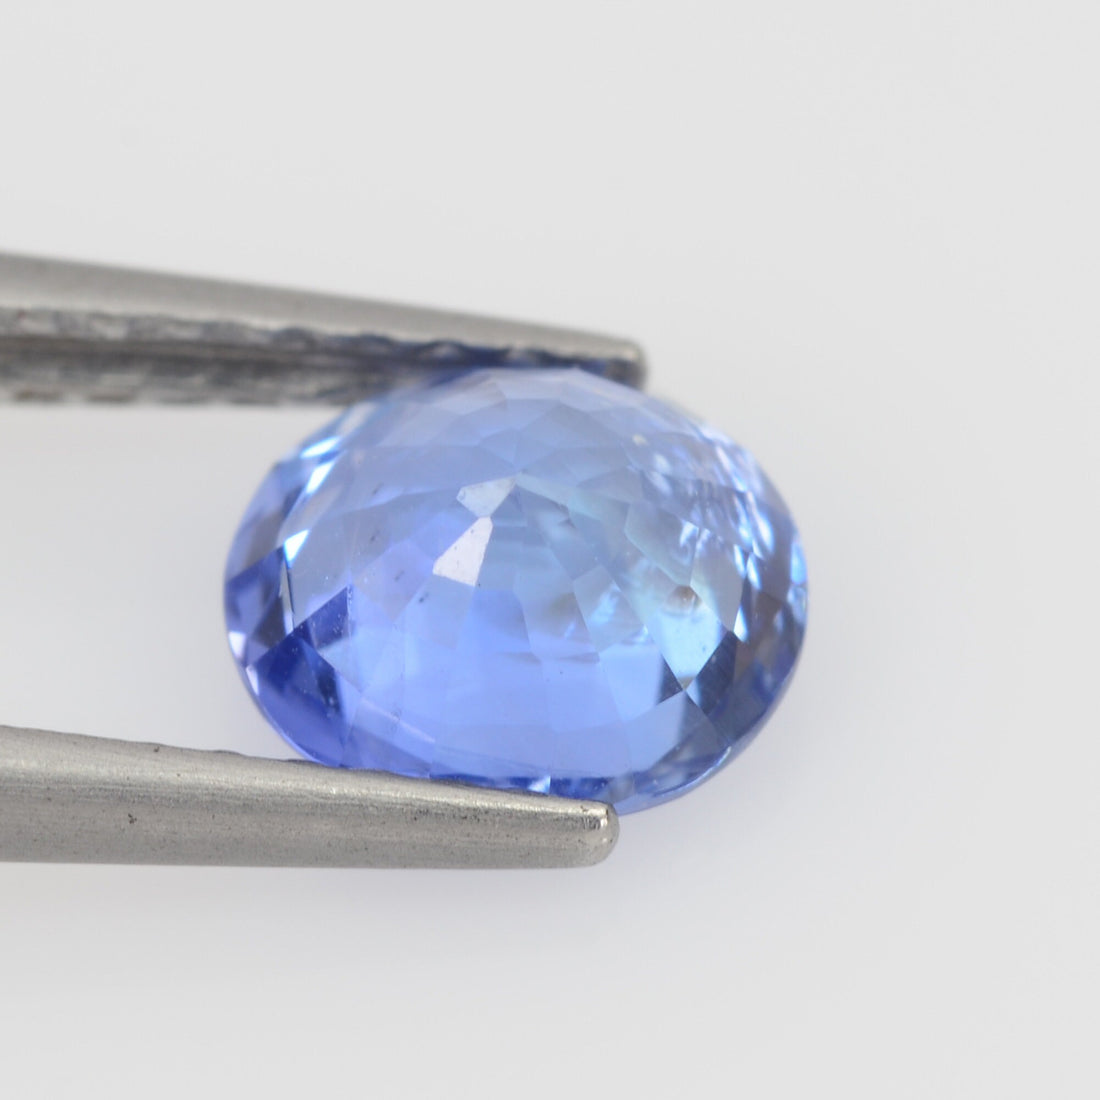 1.12 cts Natural Blue Sapphire Loose Gemstone Oval Cut